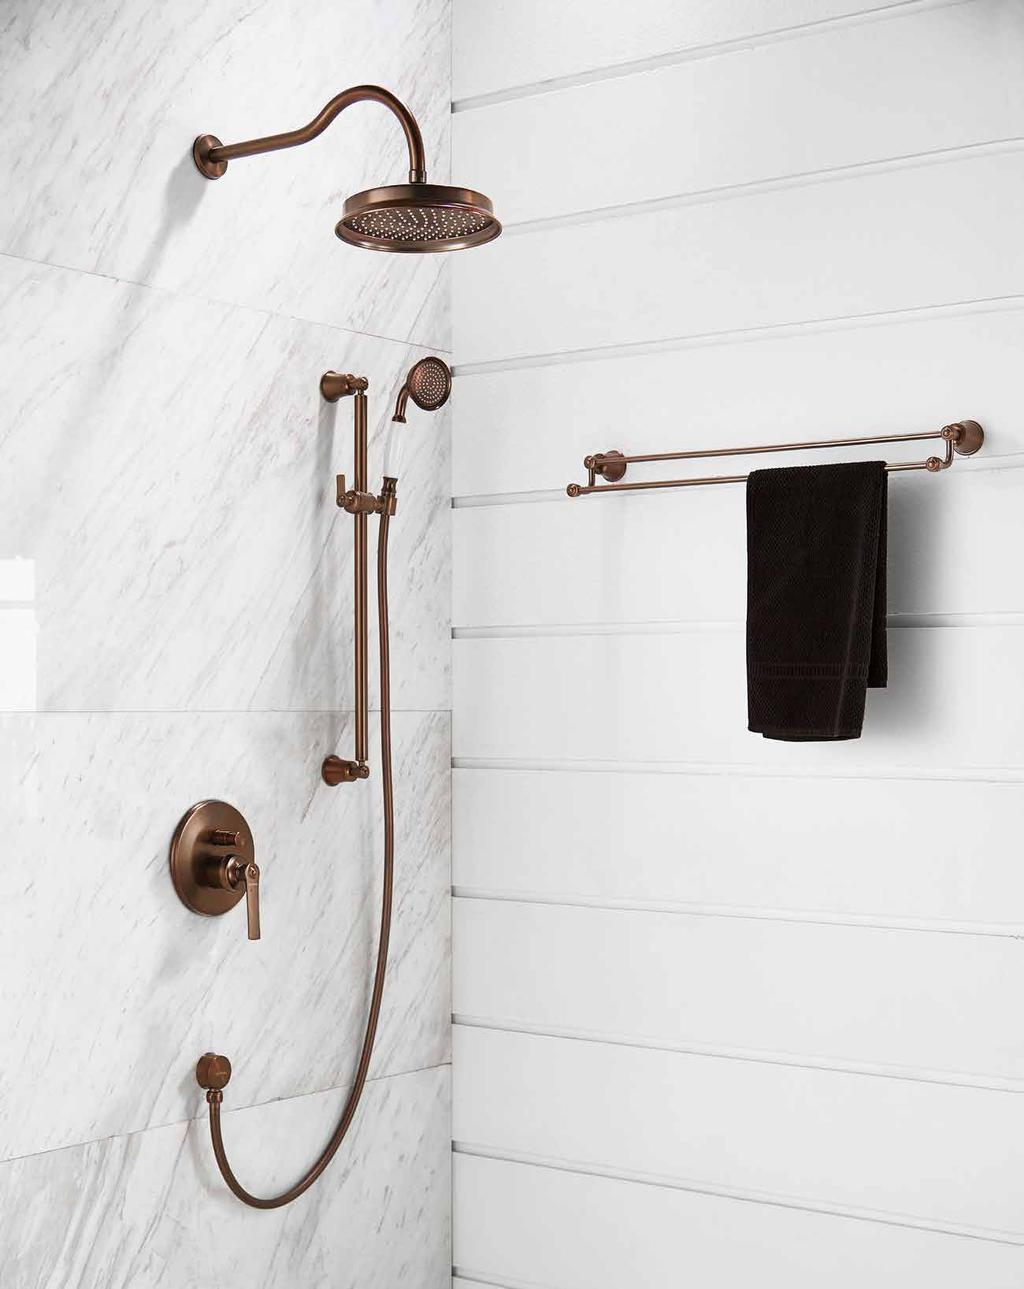 Liberty Series Rain shower is the perfect choice for you to create a quiet, leisure atmosphere in the home.